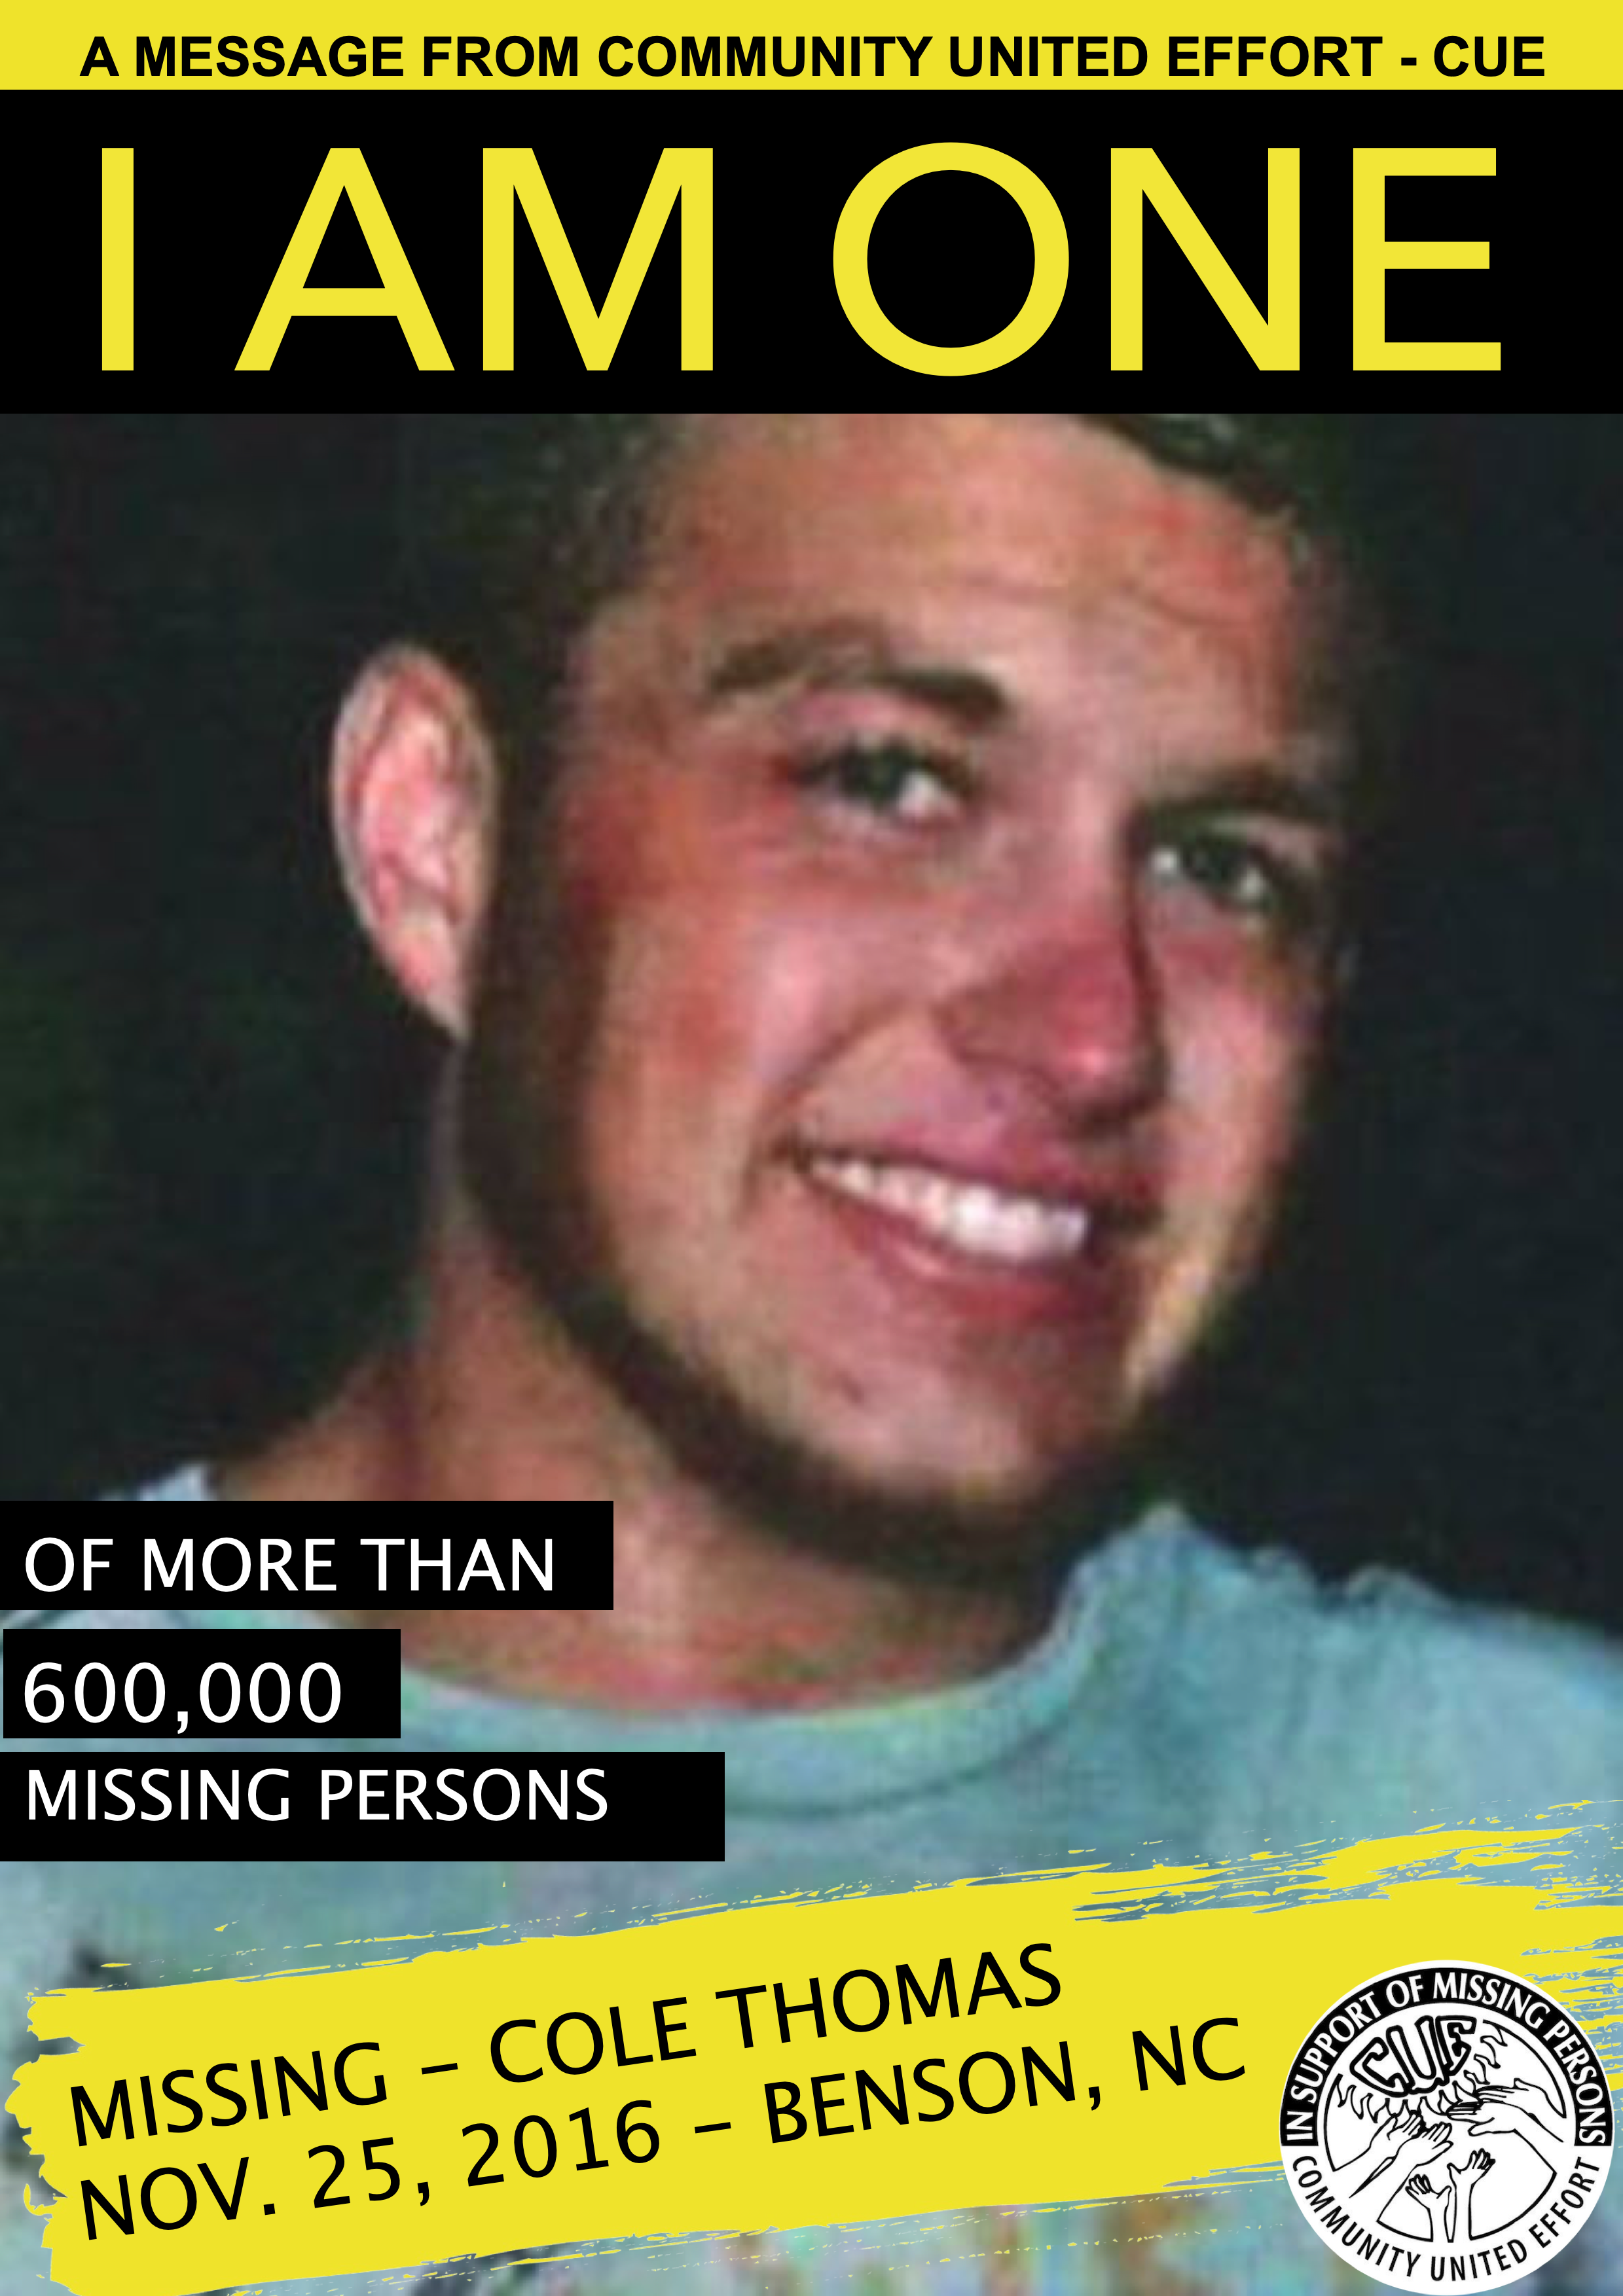 COLE THOMAS I AM ONE POSTER